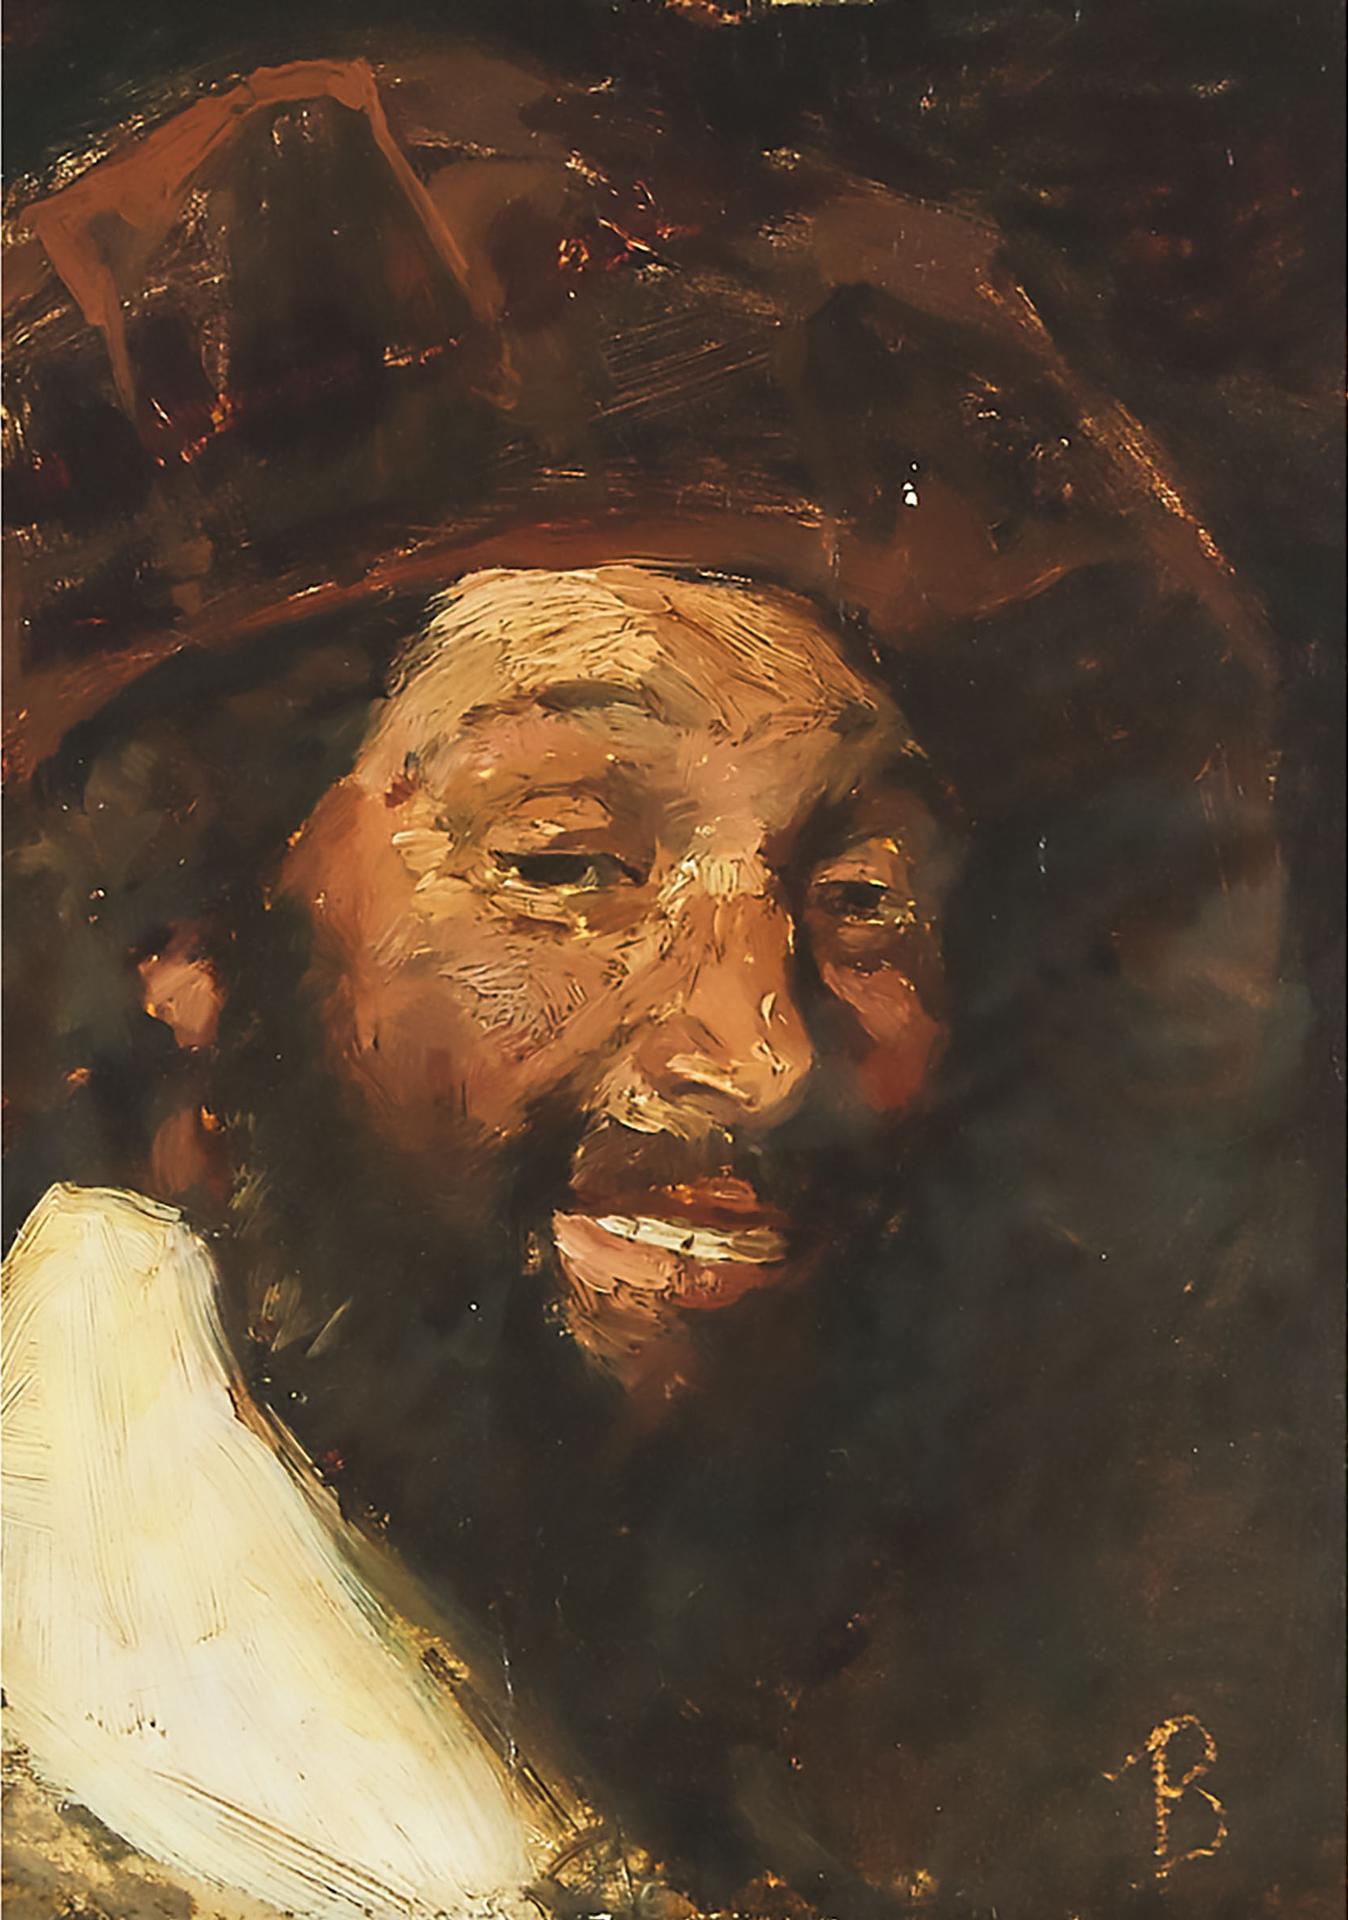 Bernardus Johannes Blommers (1845-1914) - The Laughing Jew (Man With Red Bonnet)